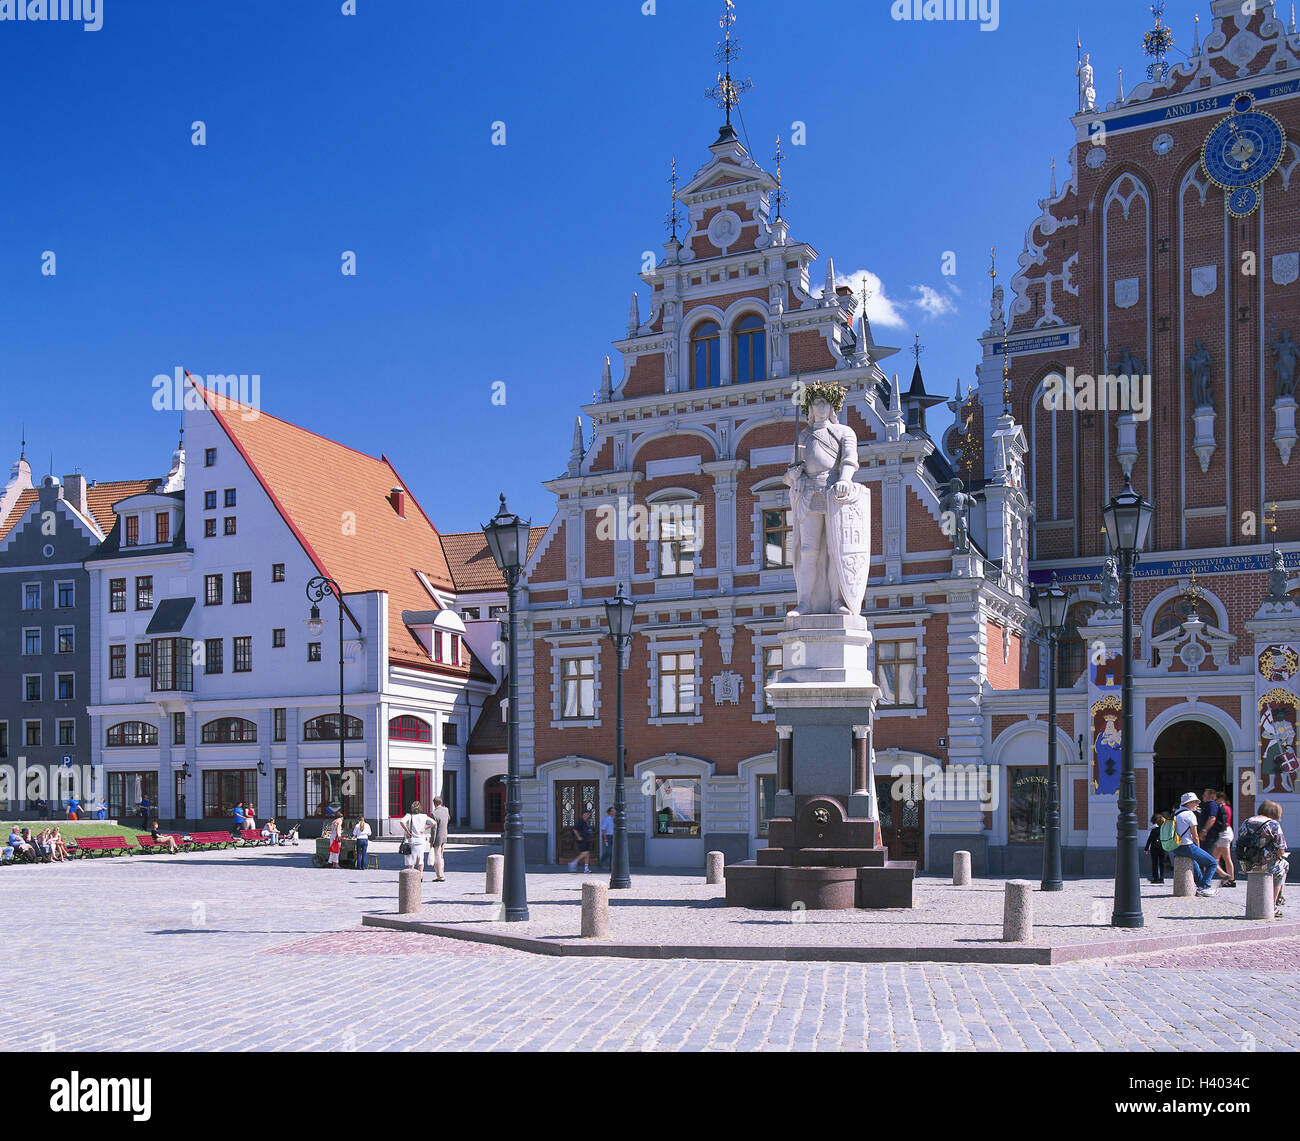 Latvia, Riga, marketplace, guild houses, wells, statue, Europe, Nordosteuropa, the Baltic States, Latvija, Latvijas Republika, town, capital, part of town, city centre, centre, big guild, small guild, place of interest, building, structures, architecture, architecture, monument Stock Photo